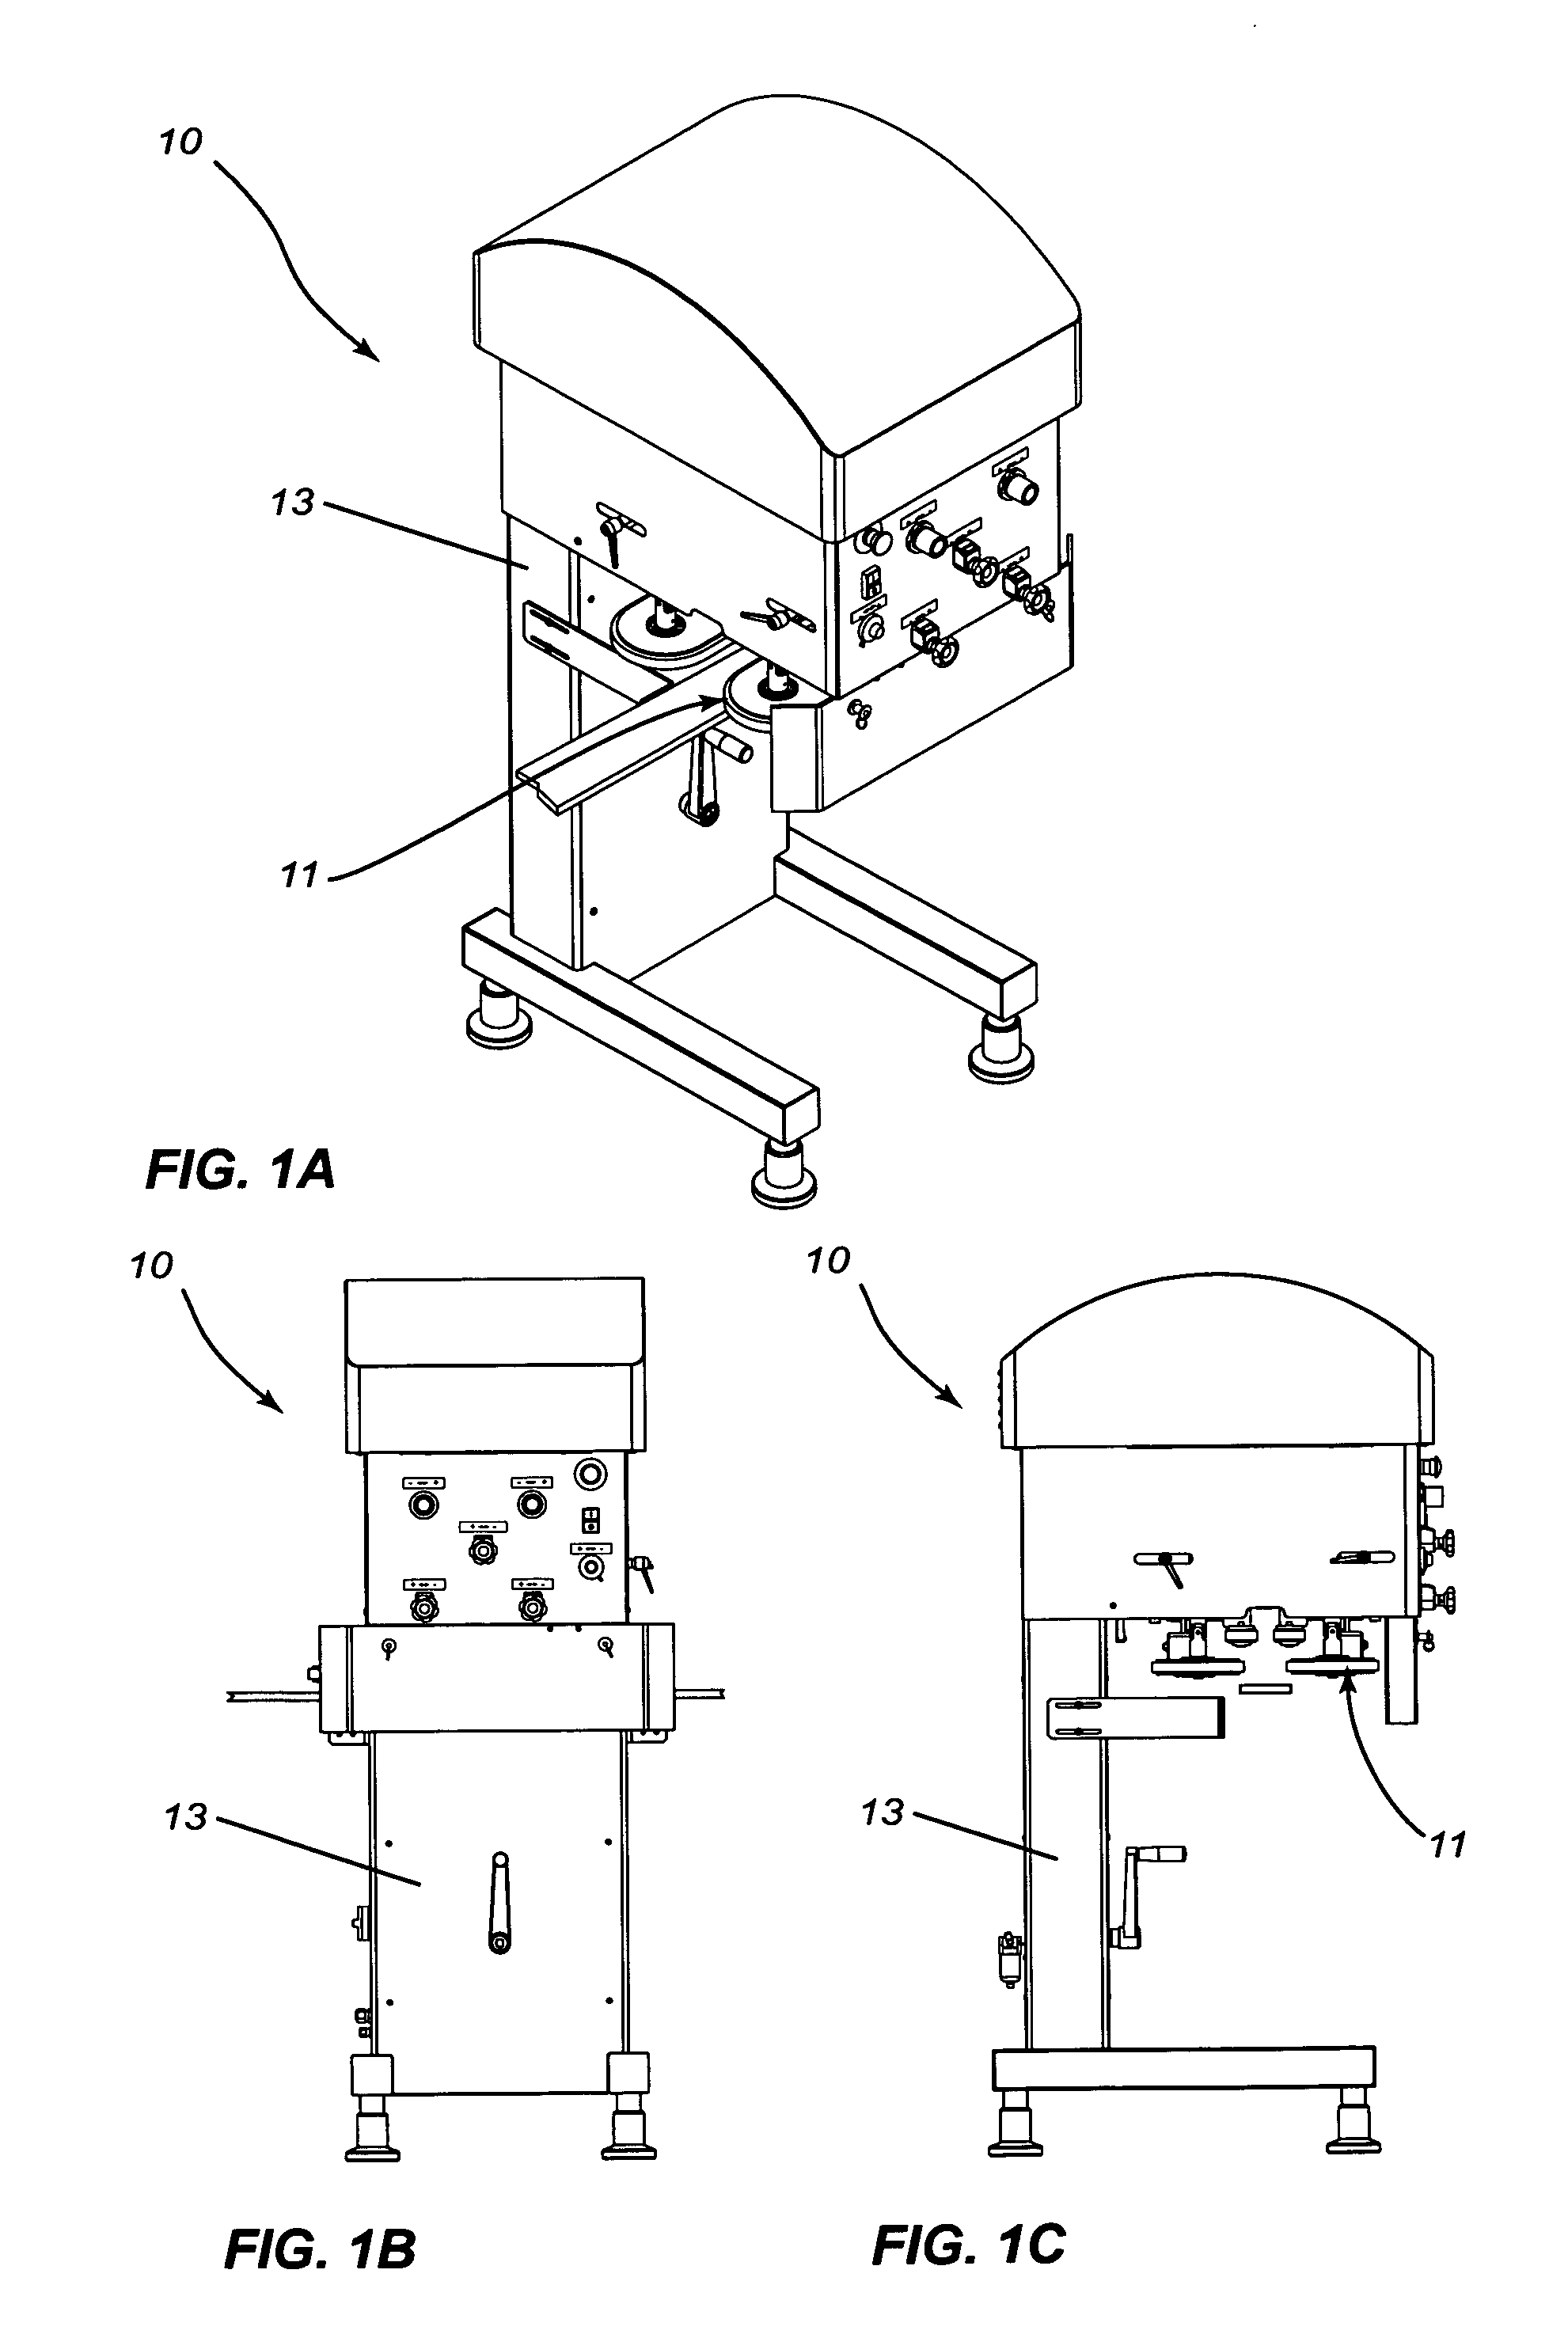 Apparatus and method for rotating a cap relatively to a container